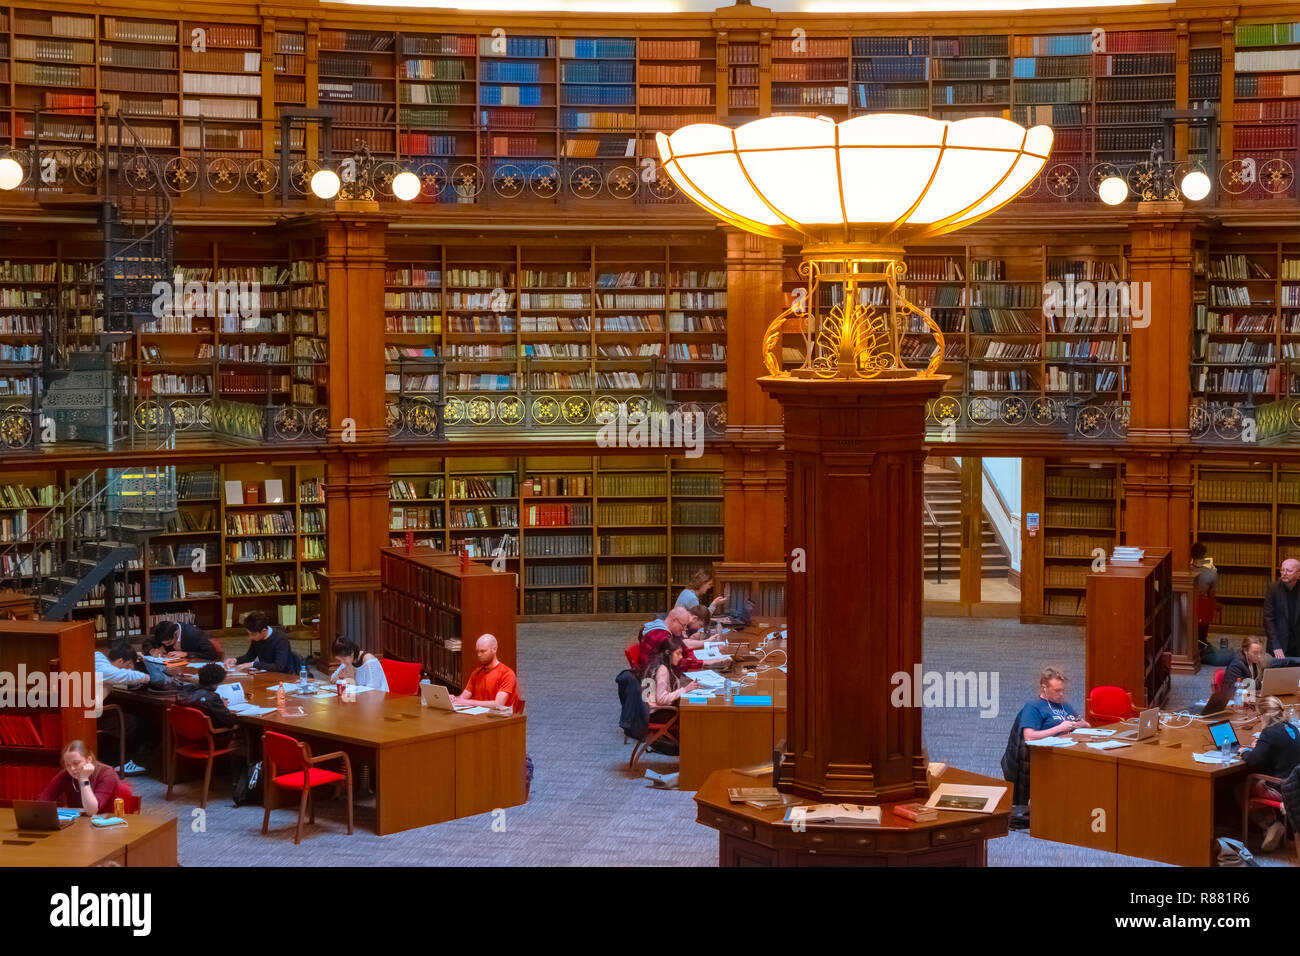 Liverpool, UK - May 16 2018: The Picton Reading Room at Liverpool Central Library was founded in 1875 designed by Cornelius Sherlock and modelled afte Stock Photo